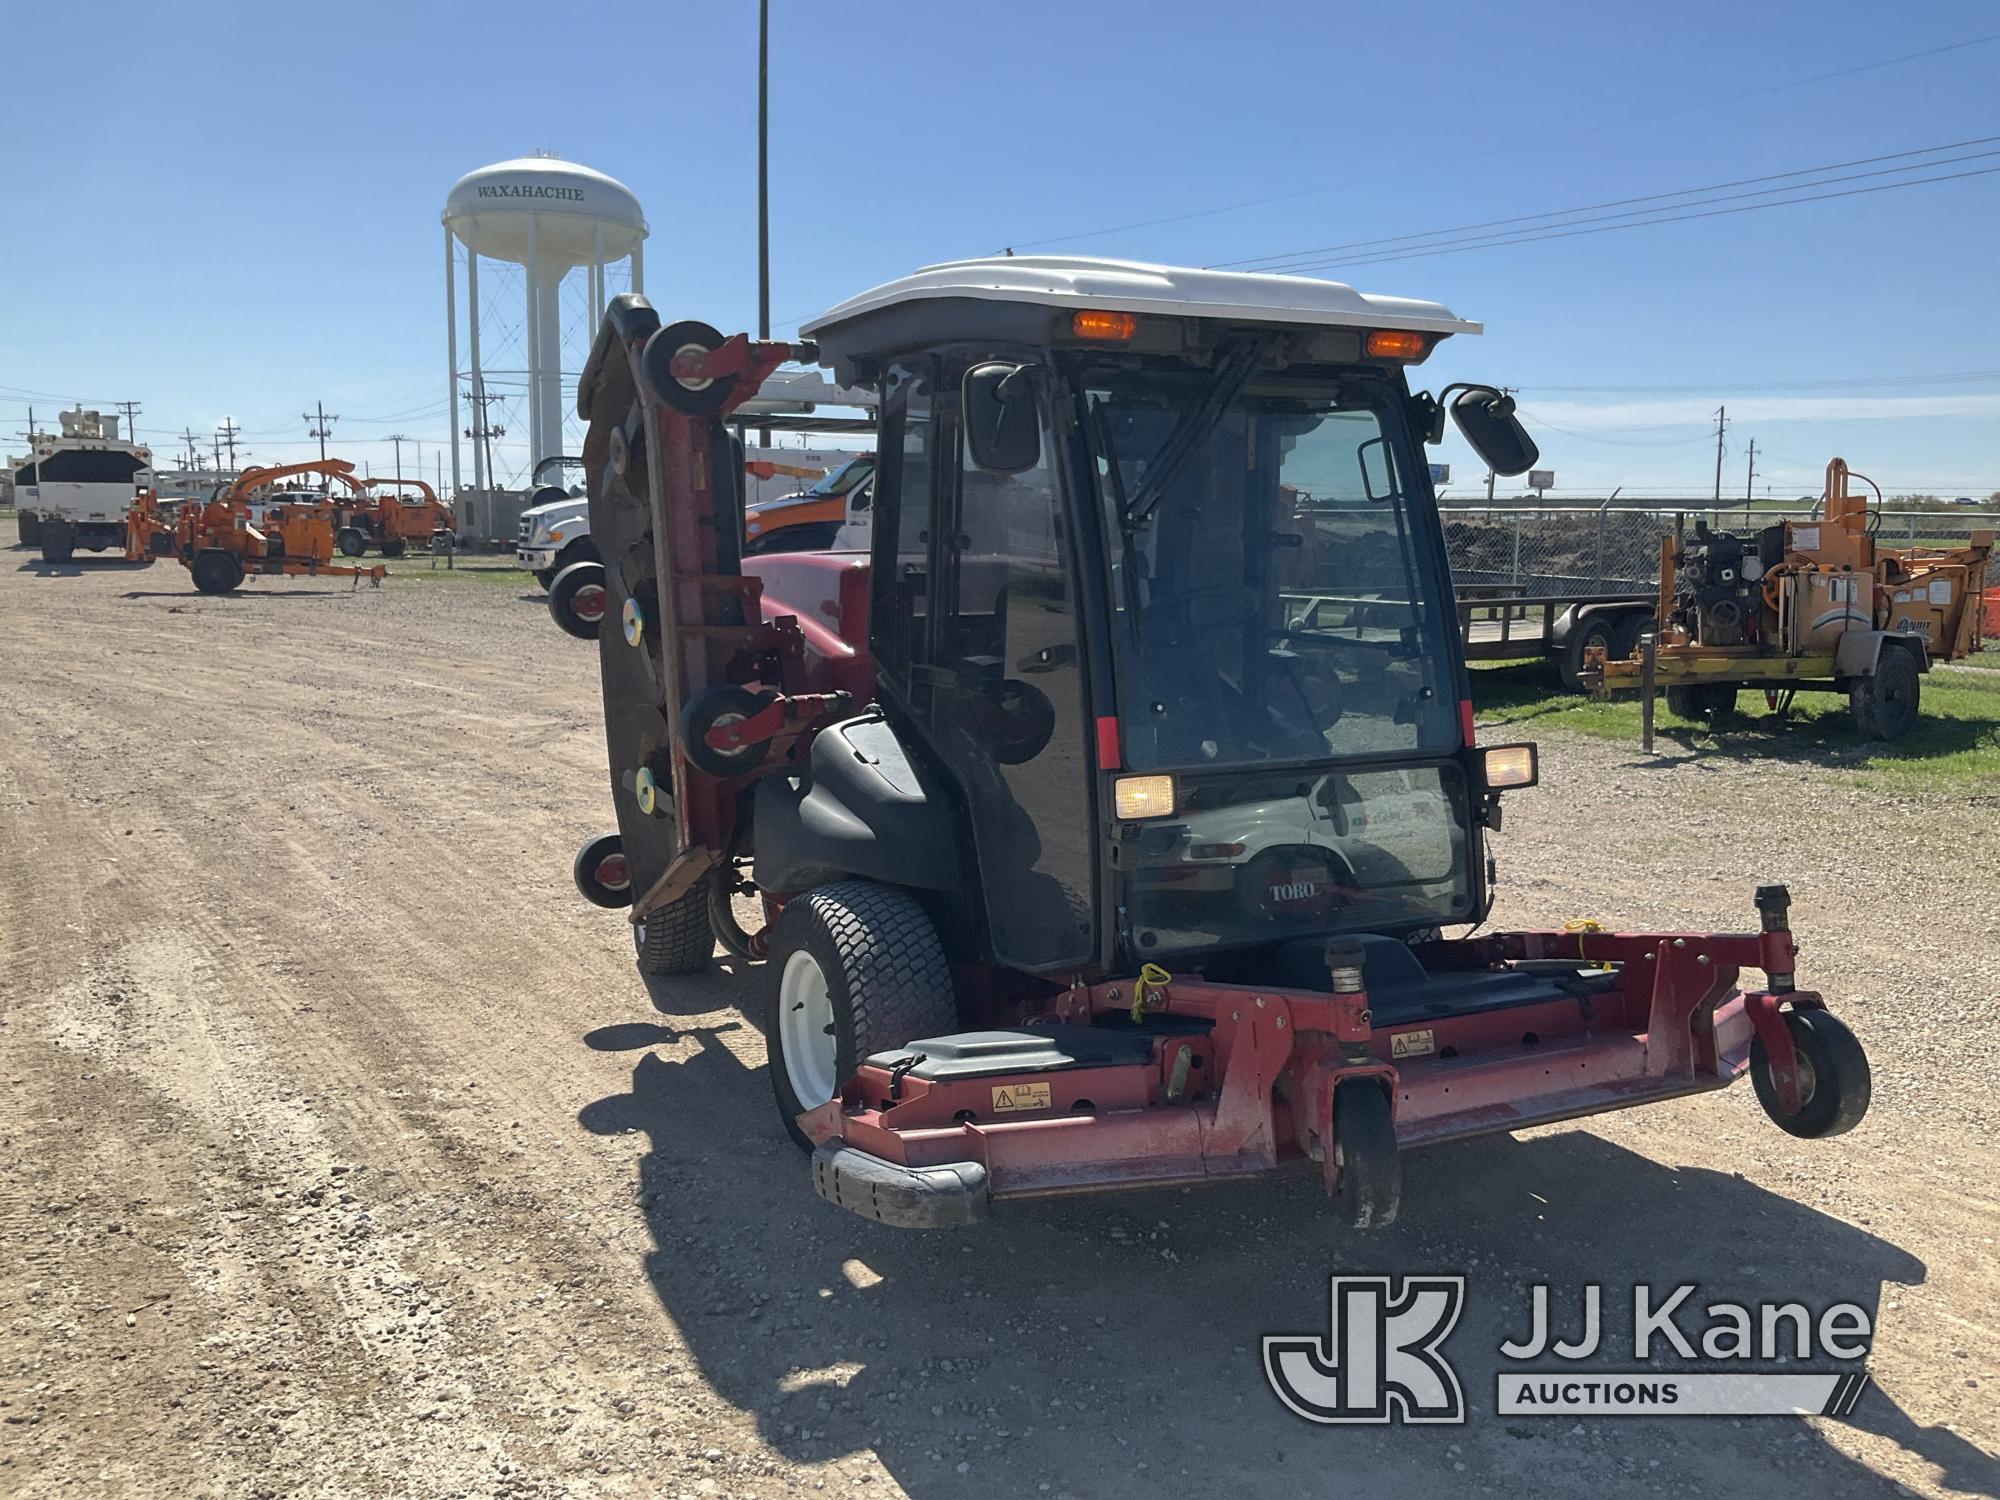 (Waxahachie, TX) 2013 Toro Commercial Bat-Wing Riding Lawn Mower, City of Plano Owned Runs & Moves,